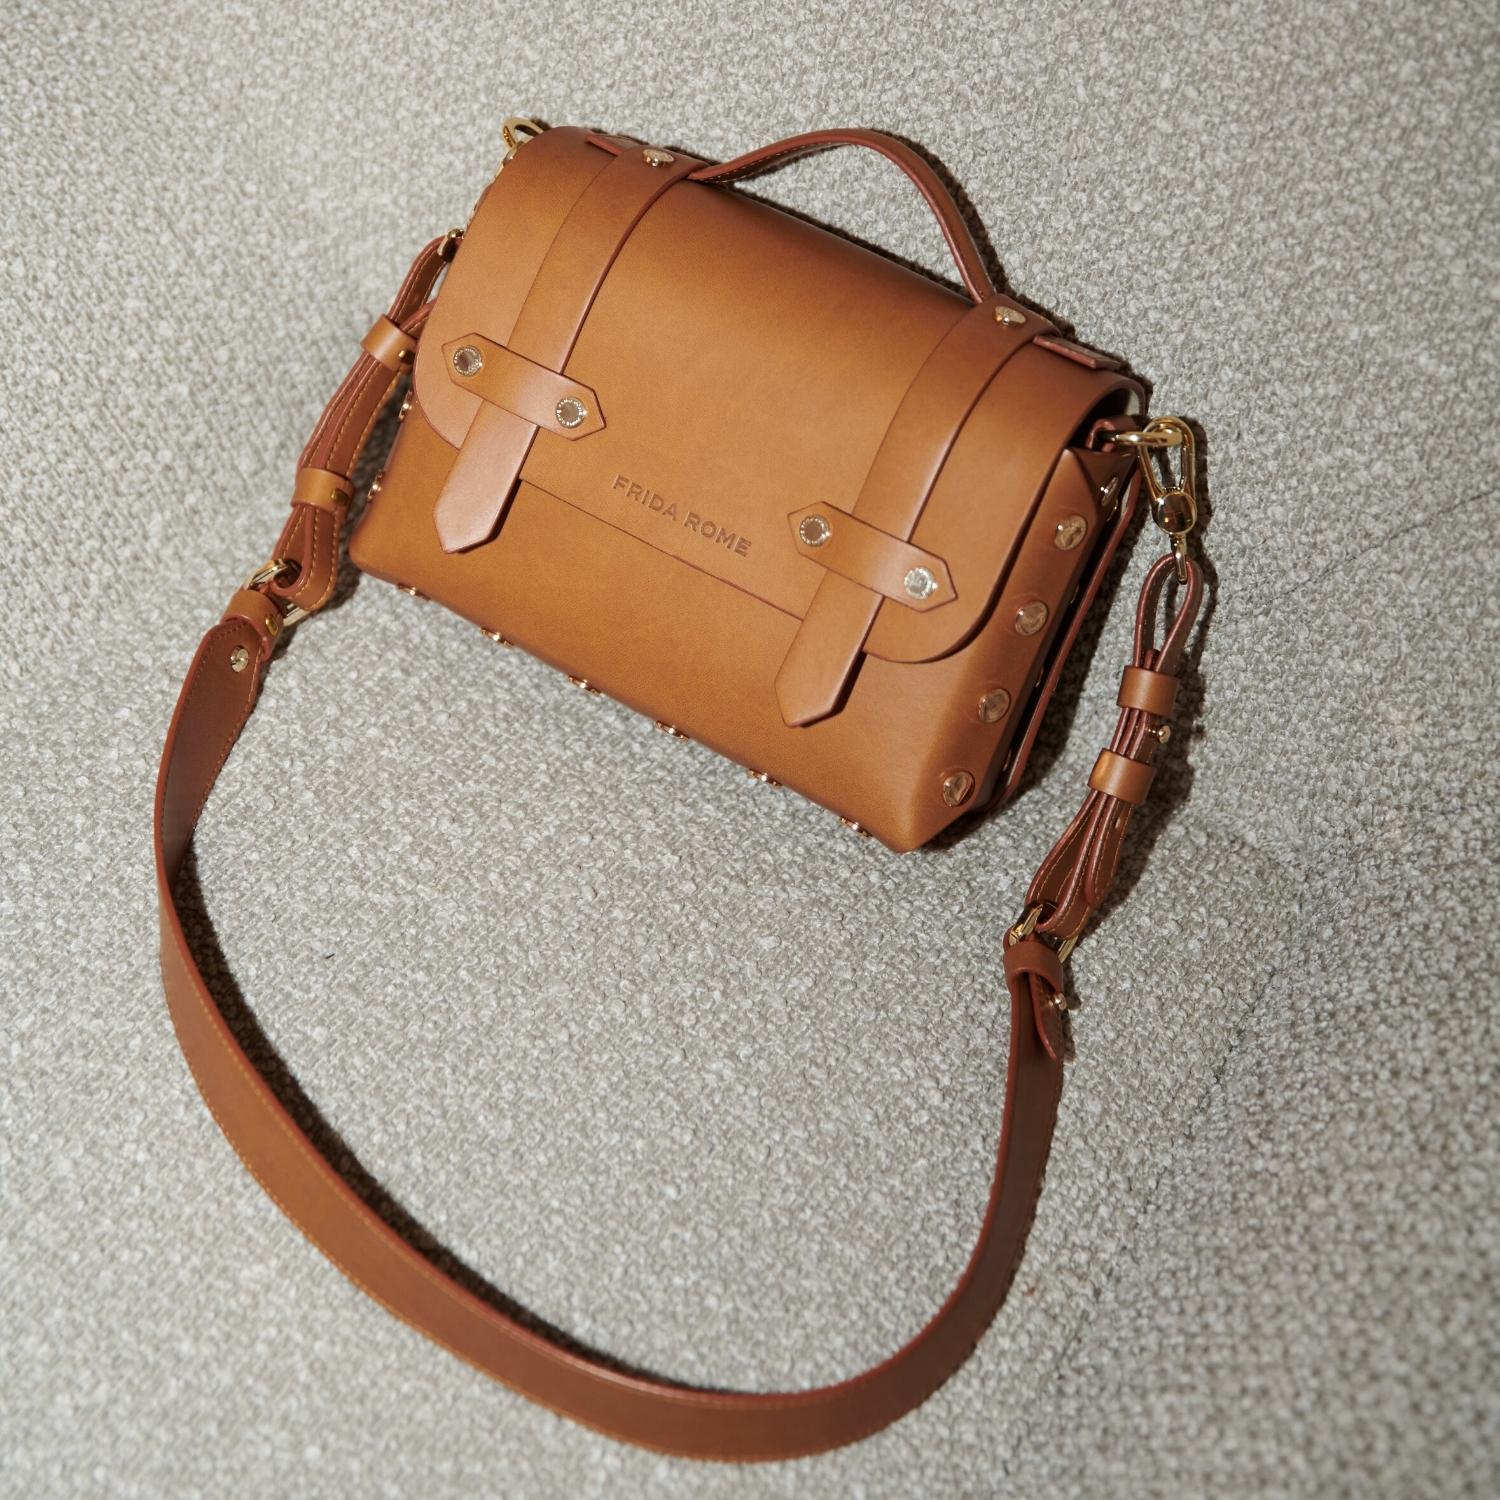 Pin en Fossil handbags and other purses